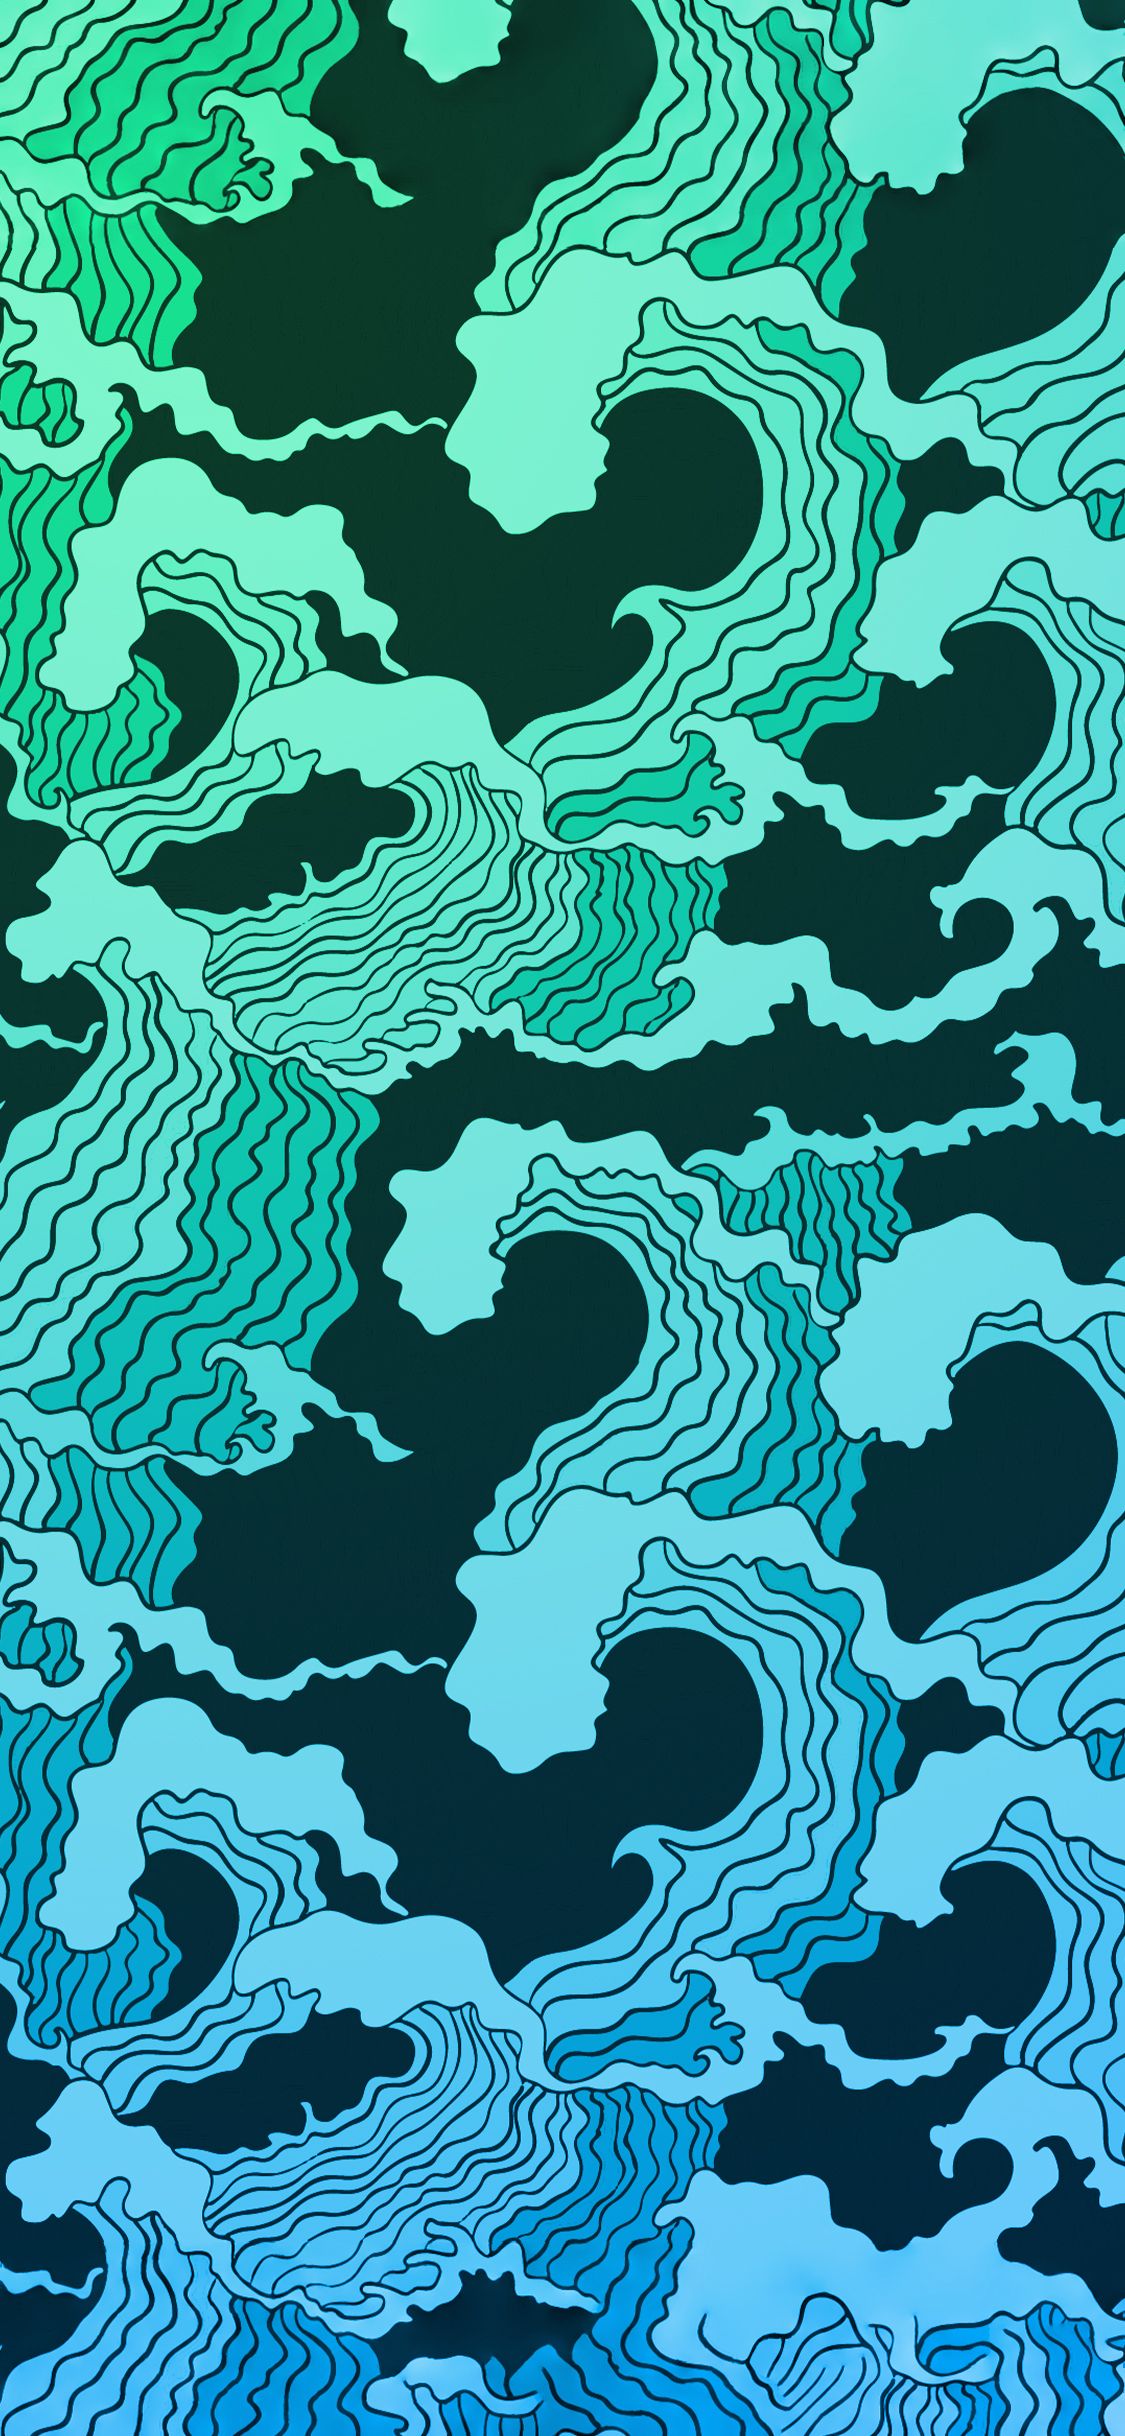 A blue and green pattern with waves - Wave